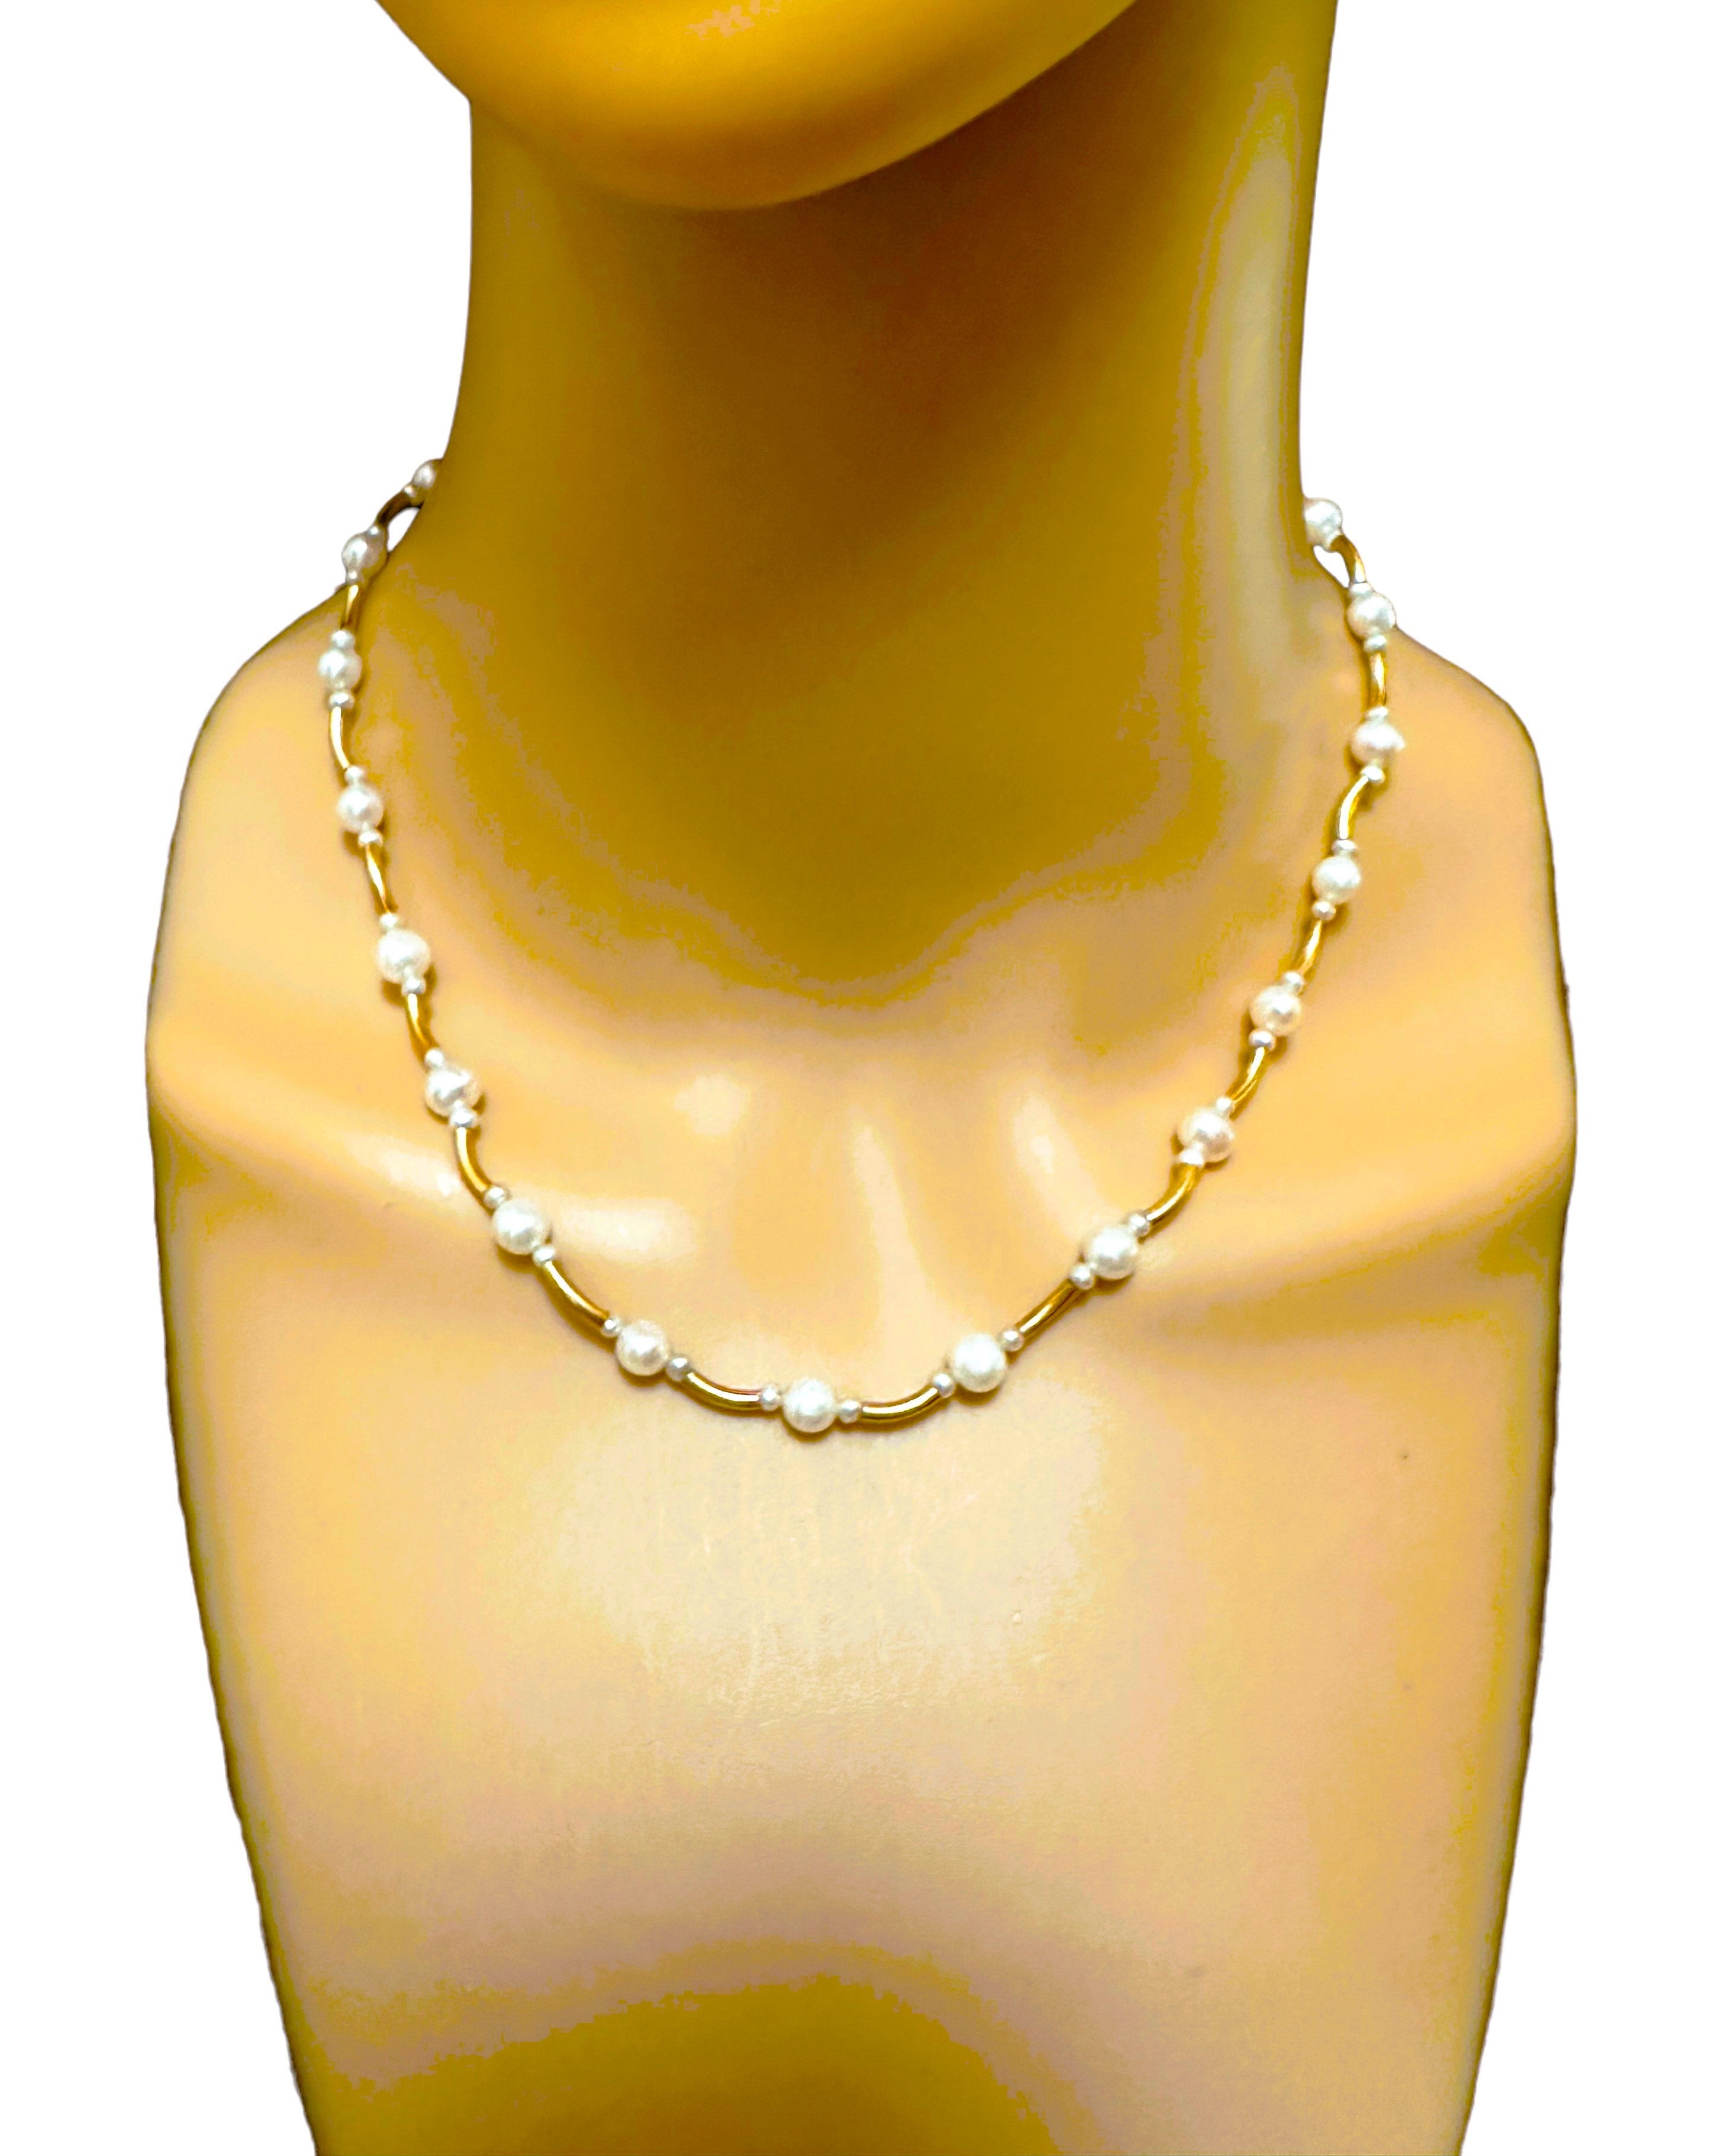 Vintage 14K Yellow Gold and Pearl Peter Bram Necklace 16 - 19 Inches